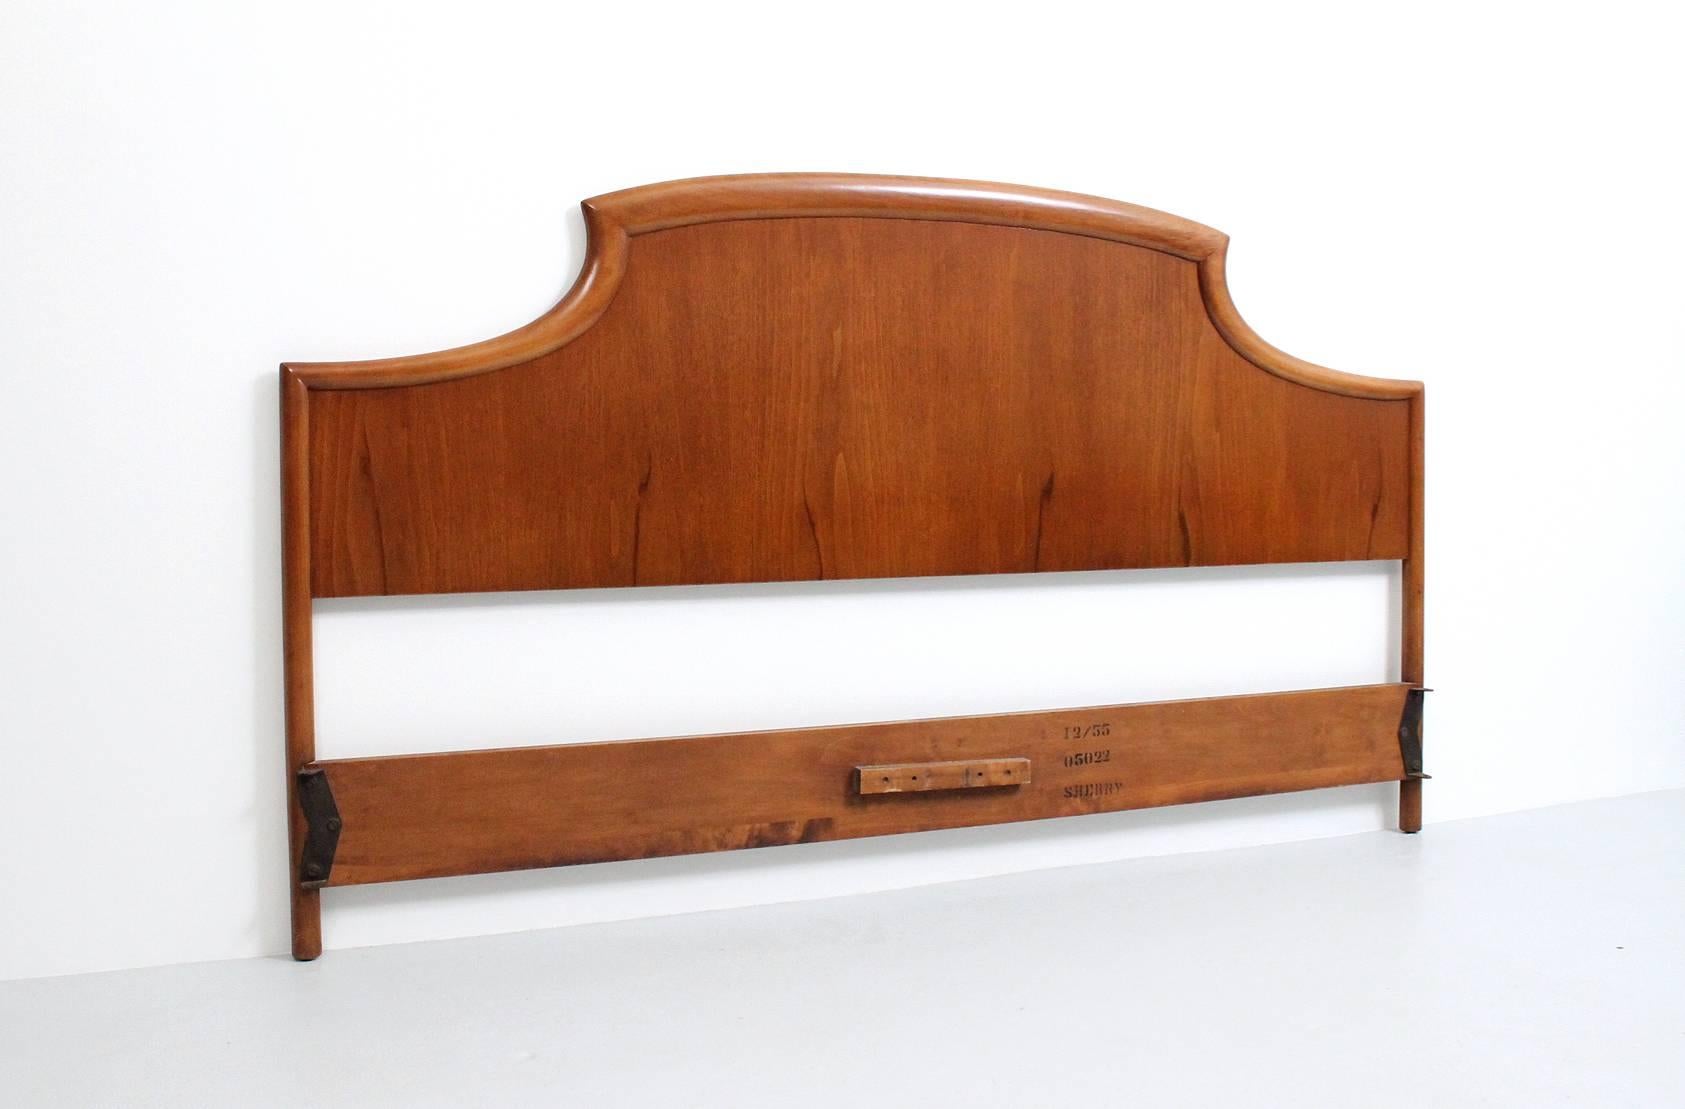 King-size headboard designed by T. H. Robsjohn-Gibbings for Widdicomb. Wonderfully sculptural and seldom seen headboard by this designer. Please see our listing for the dresser from this line.